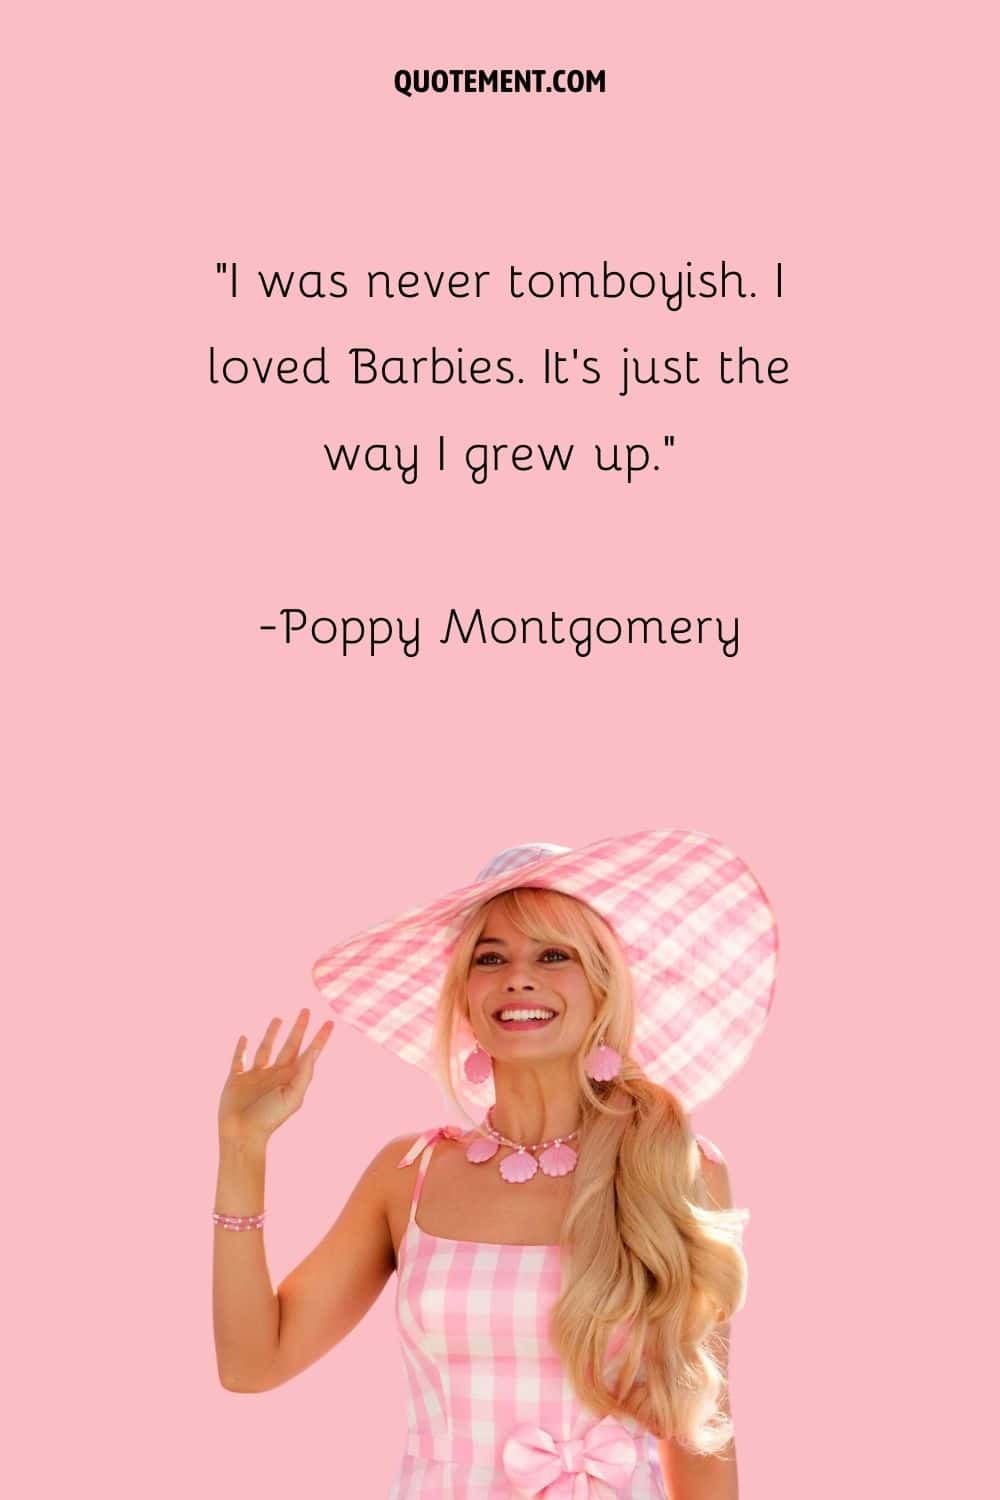 I was never tomboyish. I loved Barbies. It's just the way I grew up